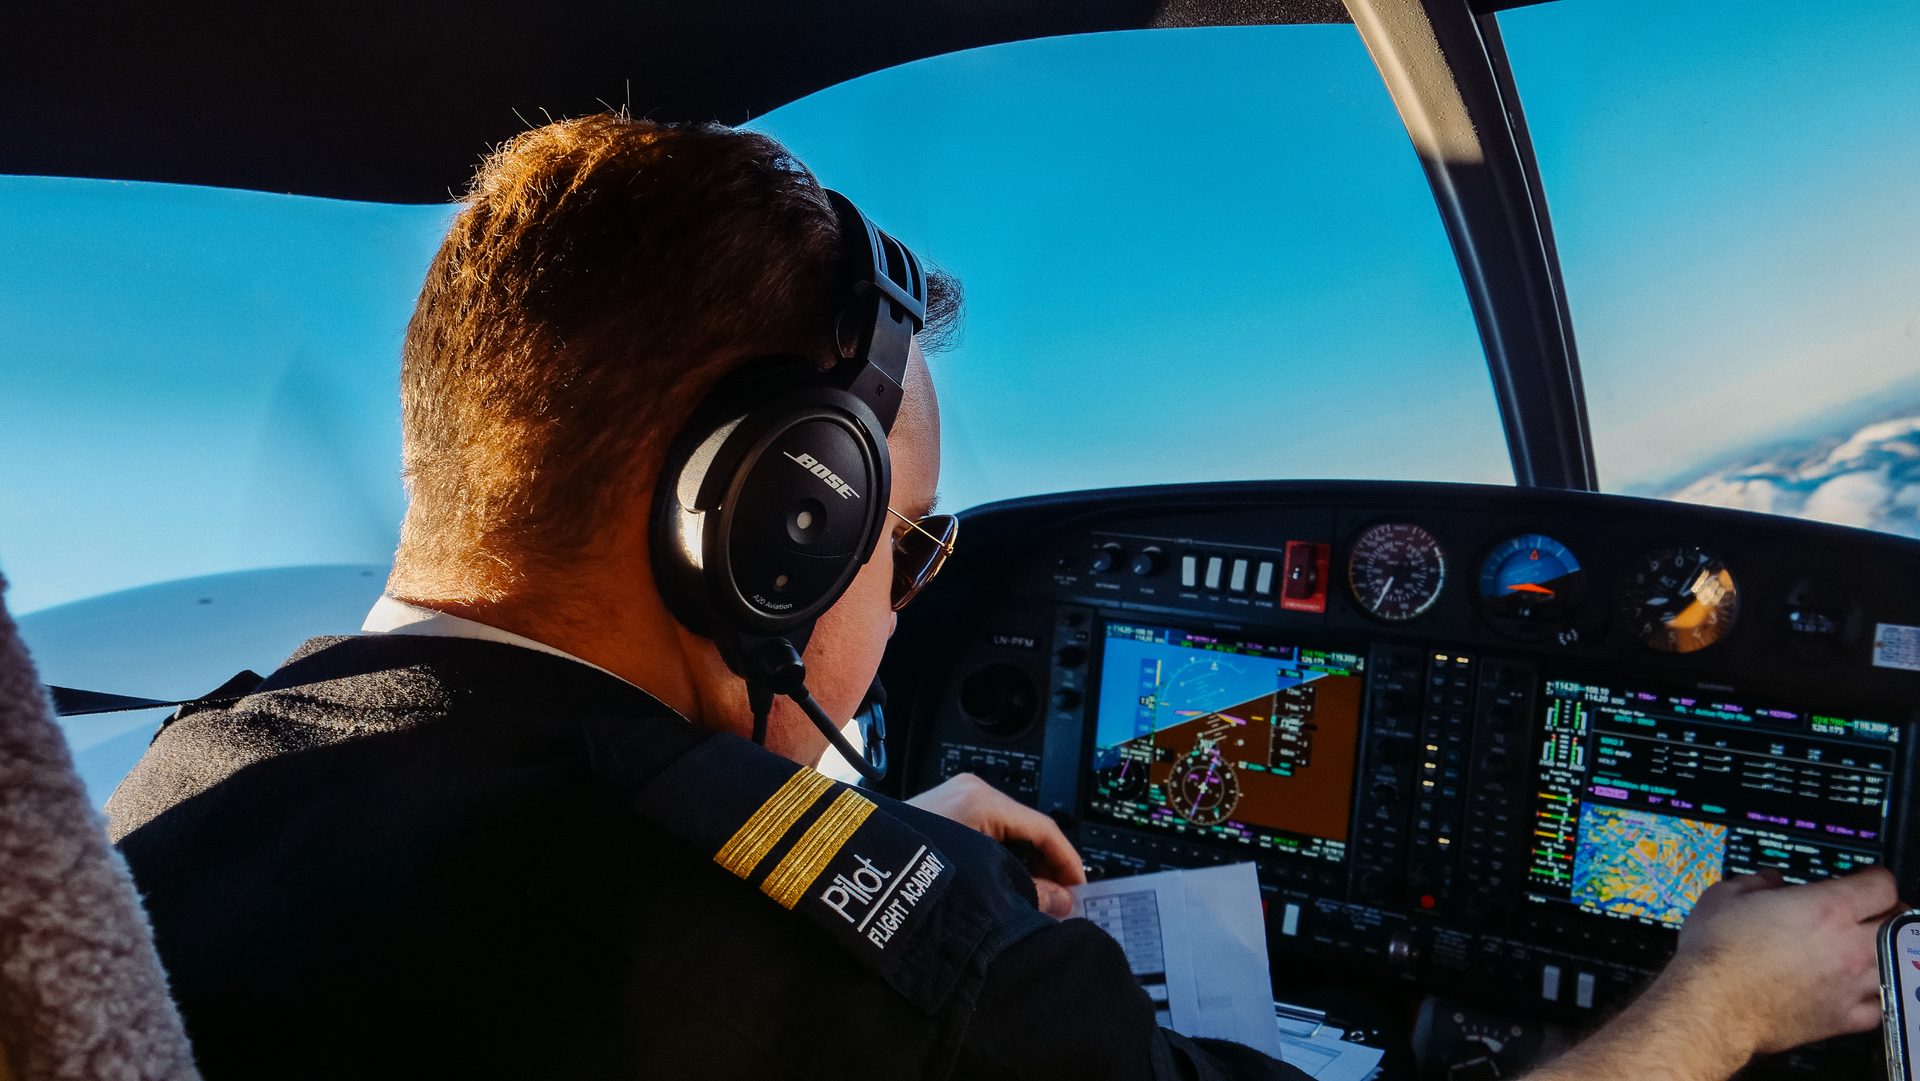 Flight instruments, Helicopter pilot, Air travel, Vehicle, Sky, Cockpit, Aviation, Aircraft, Airliner